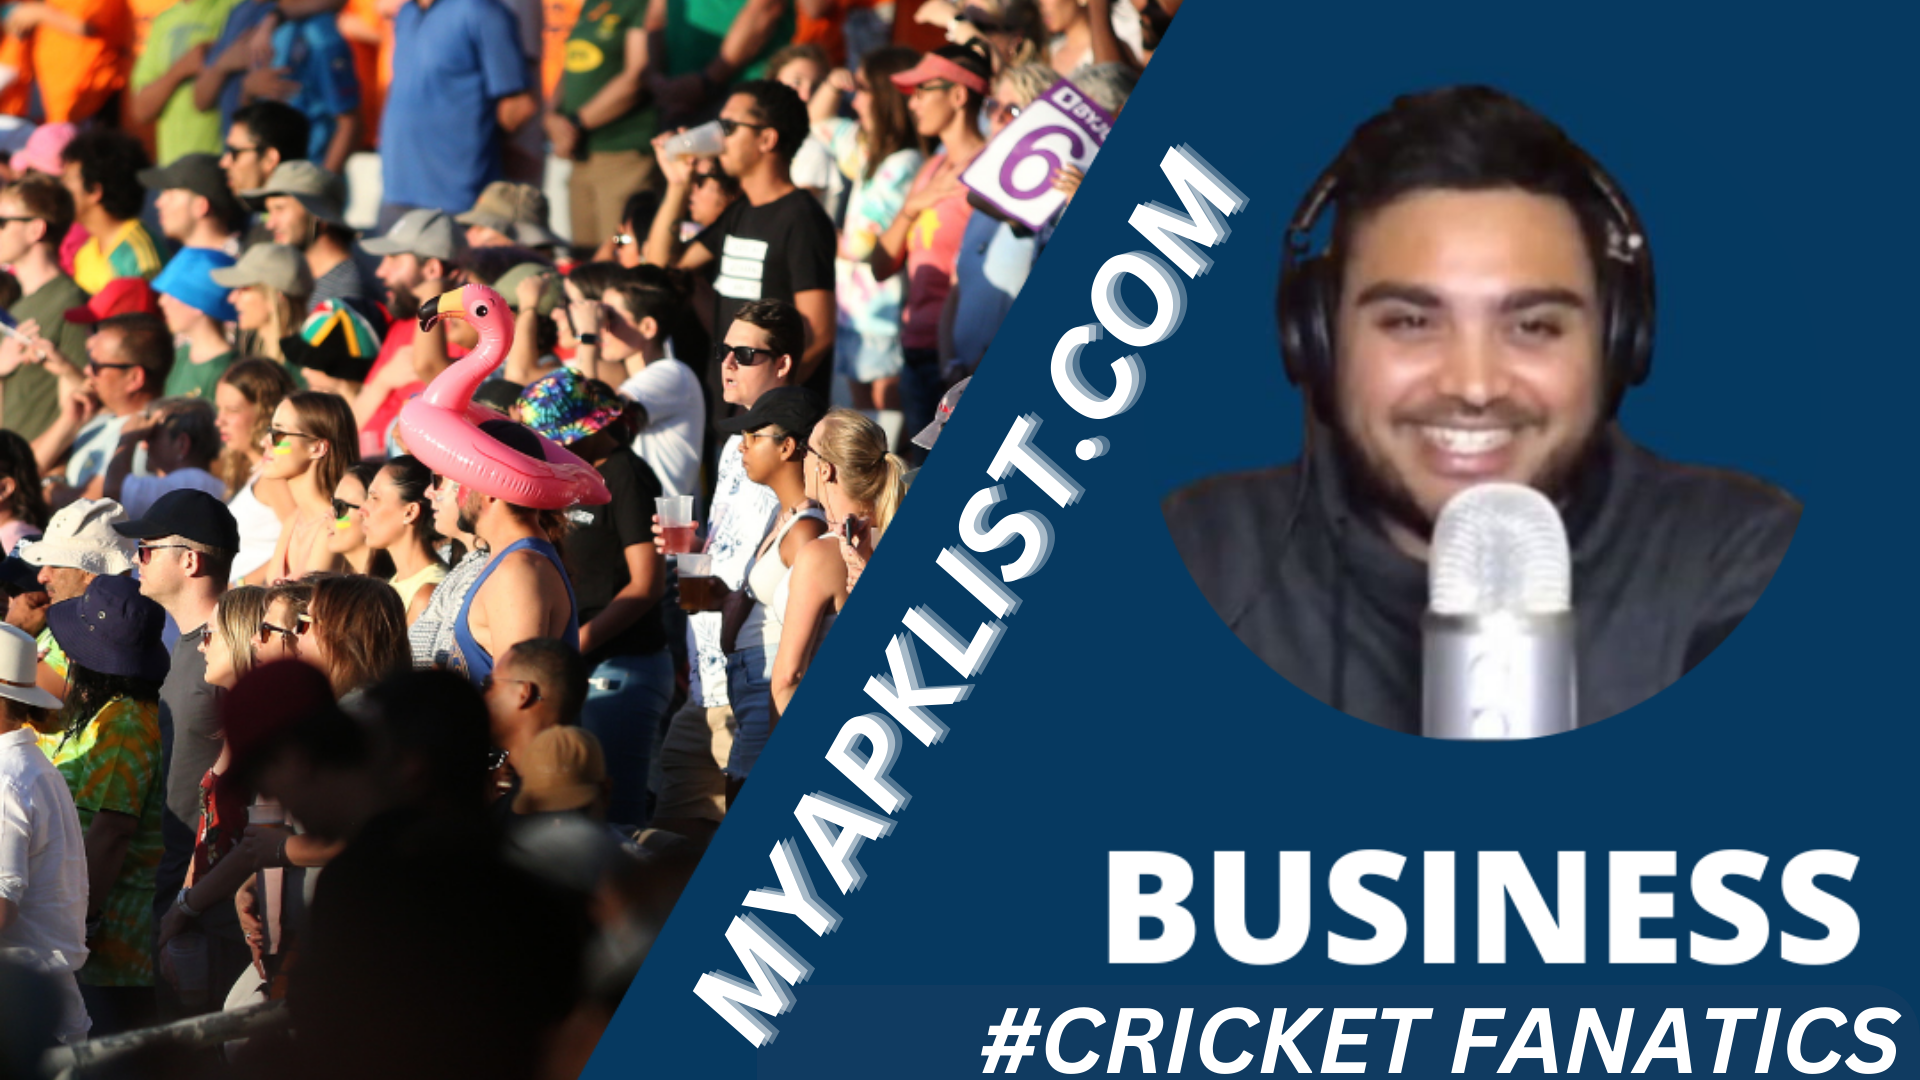 #Cricket Fanatics" Social Game With Trending Hashtags